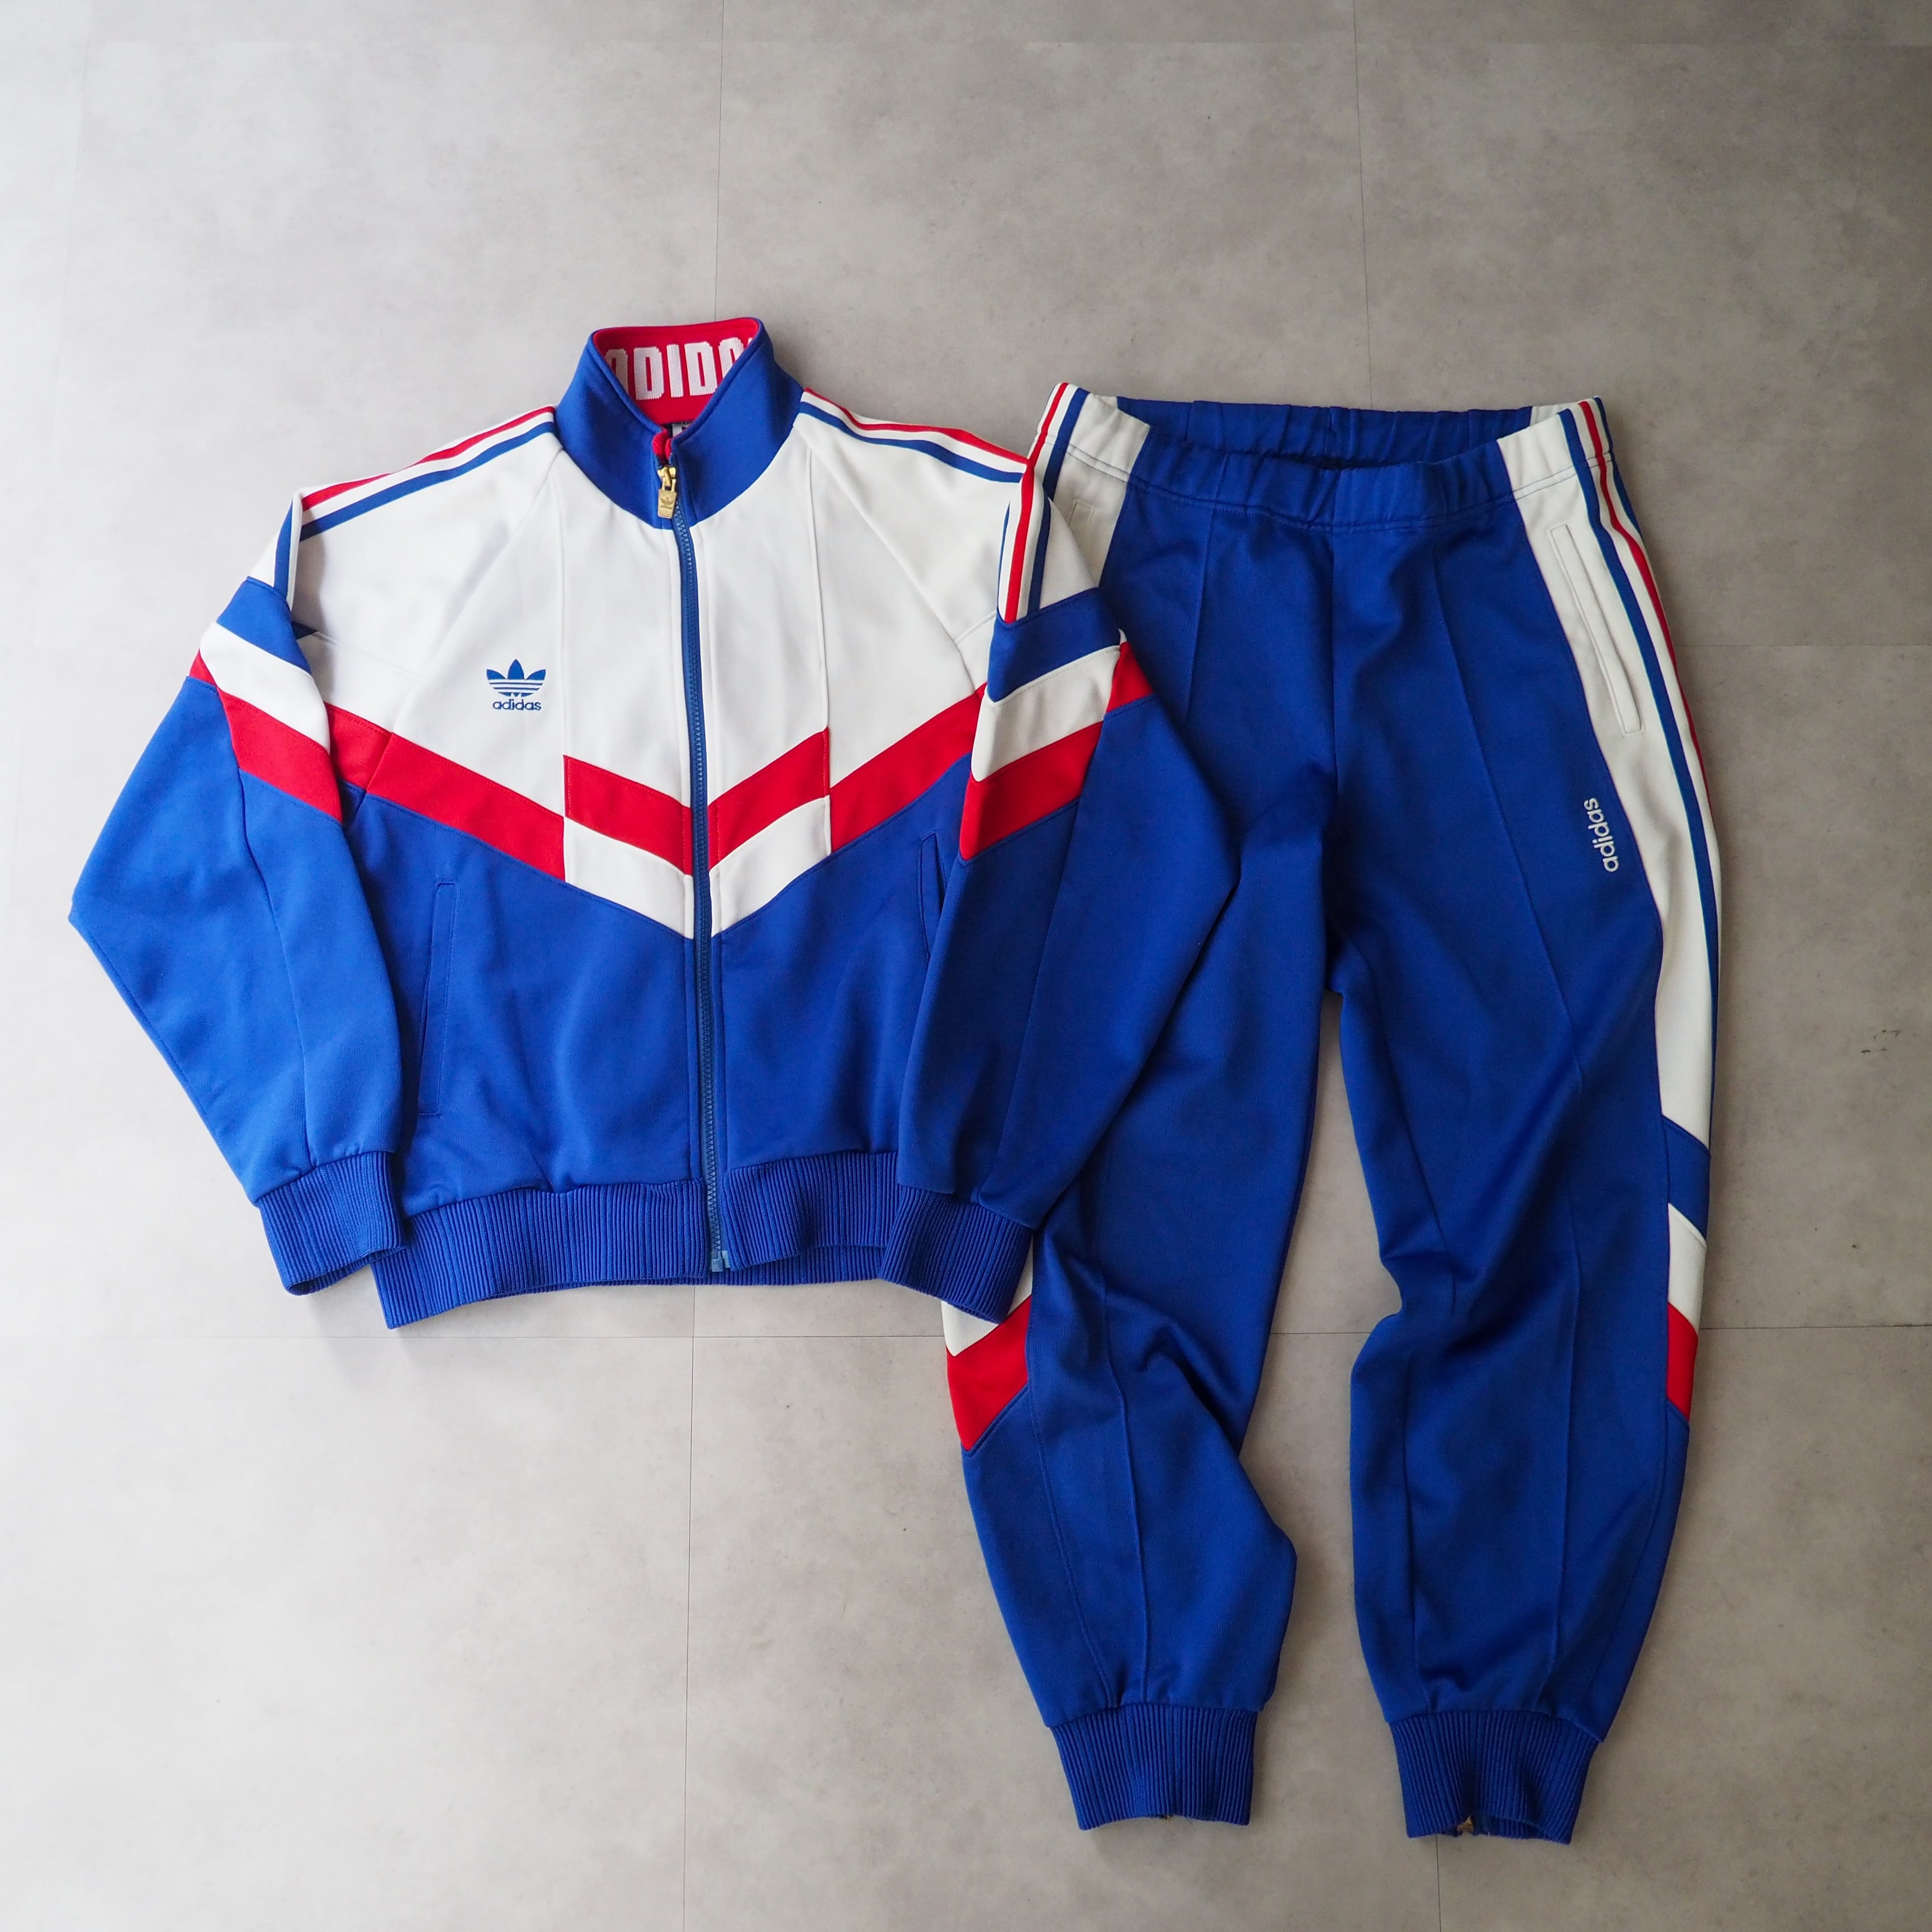 80s-90s “ADIDAS” by DESCENTE track jacket & pants set up 80年代 90